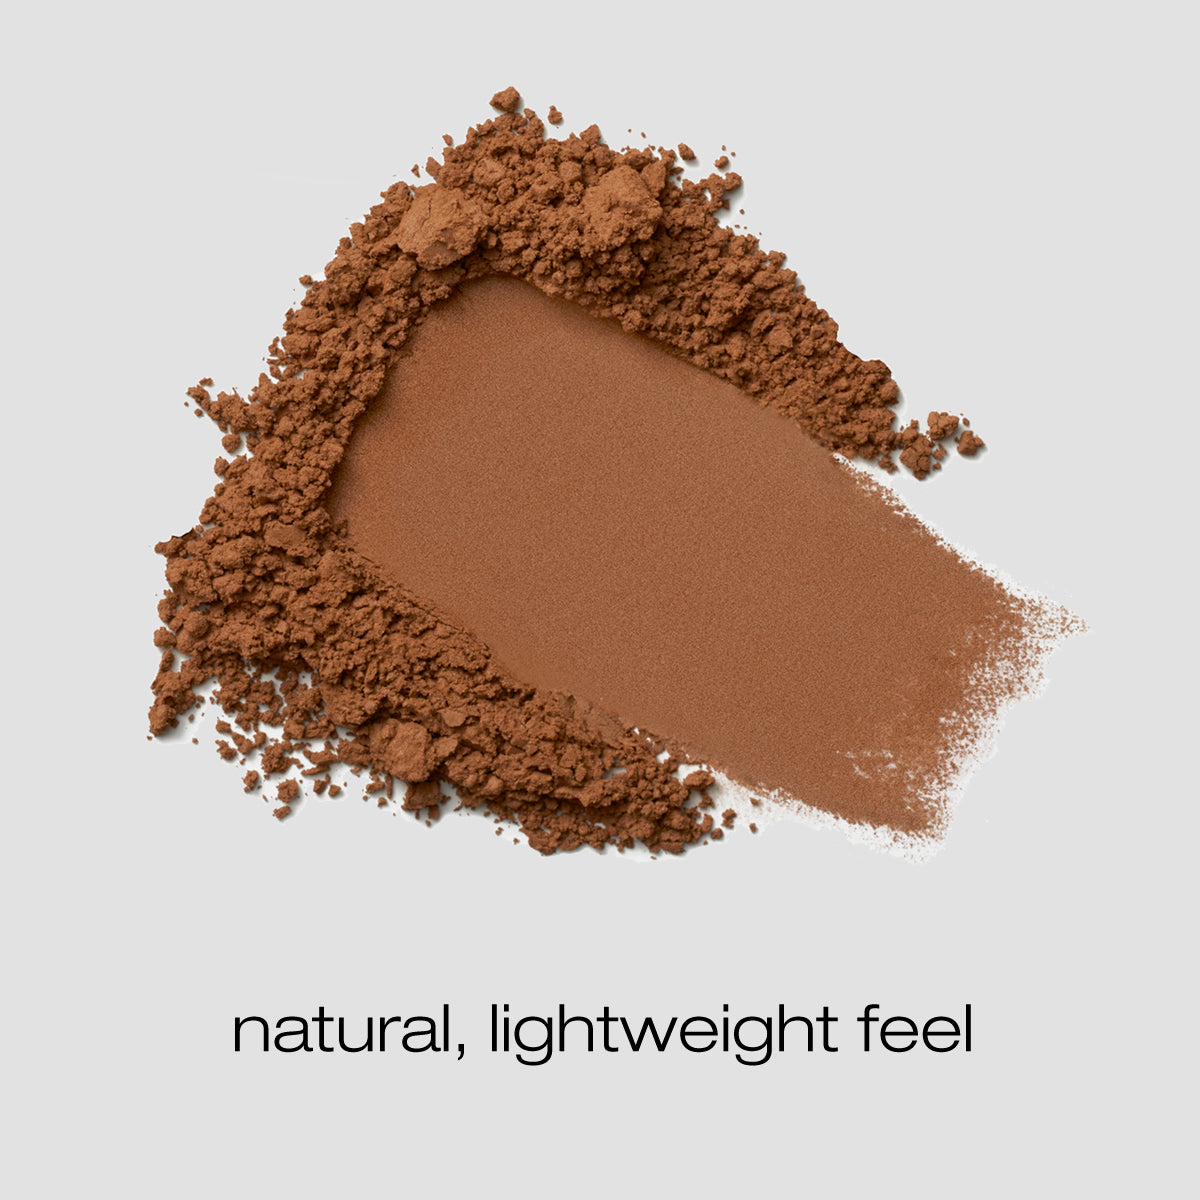 Spread of foundation powder described as a natural, lightweight feel